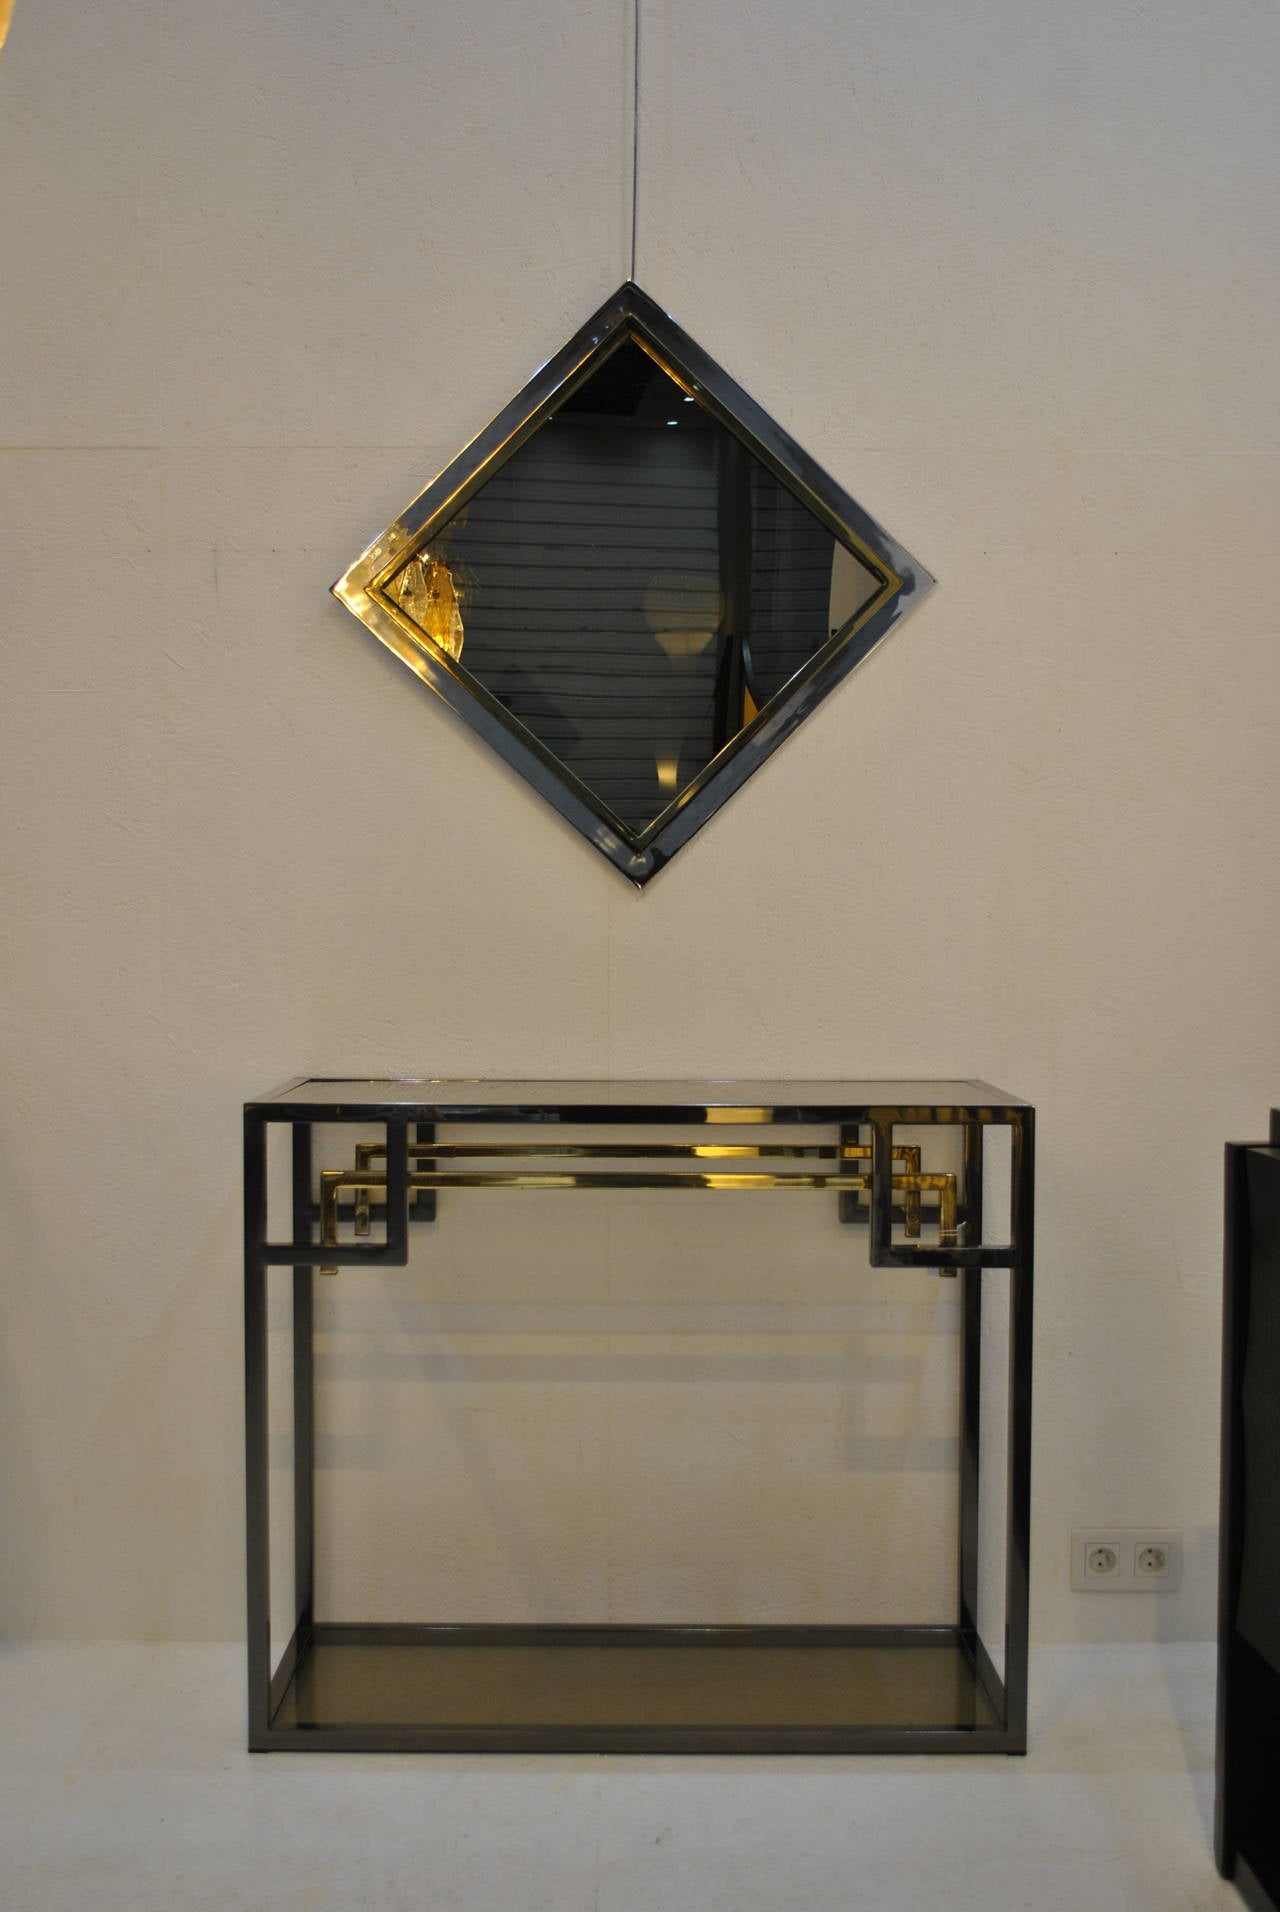 A nice chrome, 24-karat gold-plated and smoked glass console table by Belgo Chrom / Dewulf Selection, Belgium.

Belgo Chrom is a Belgian high-end furniture manufacturer that started making this type of pieces in the early seventies.
With its high